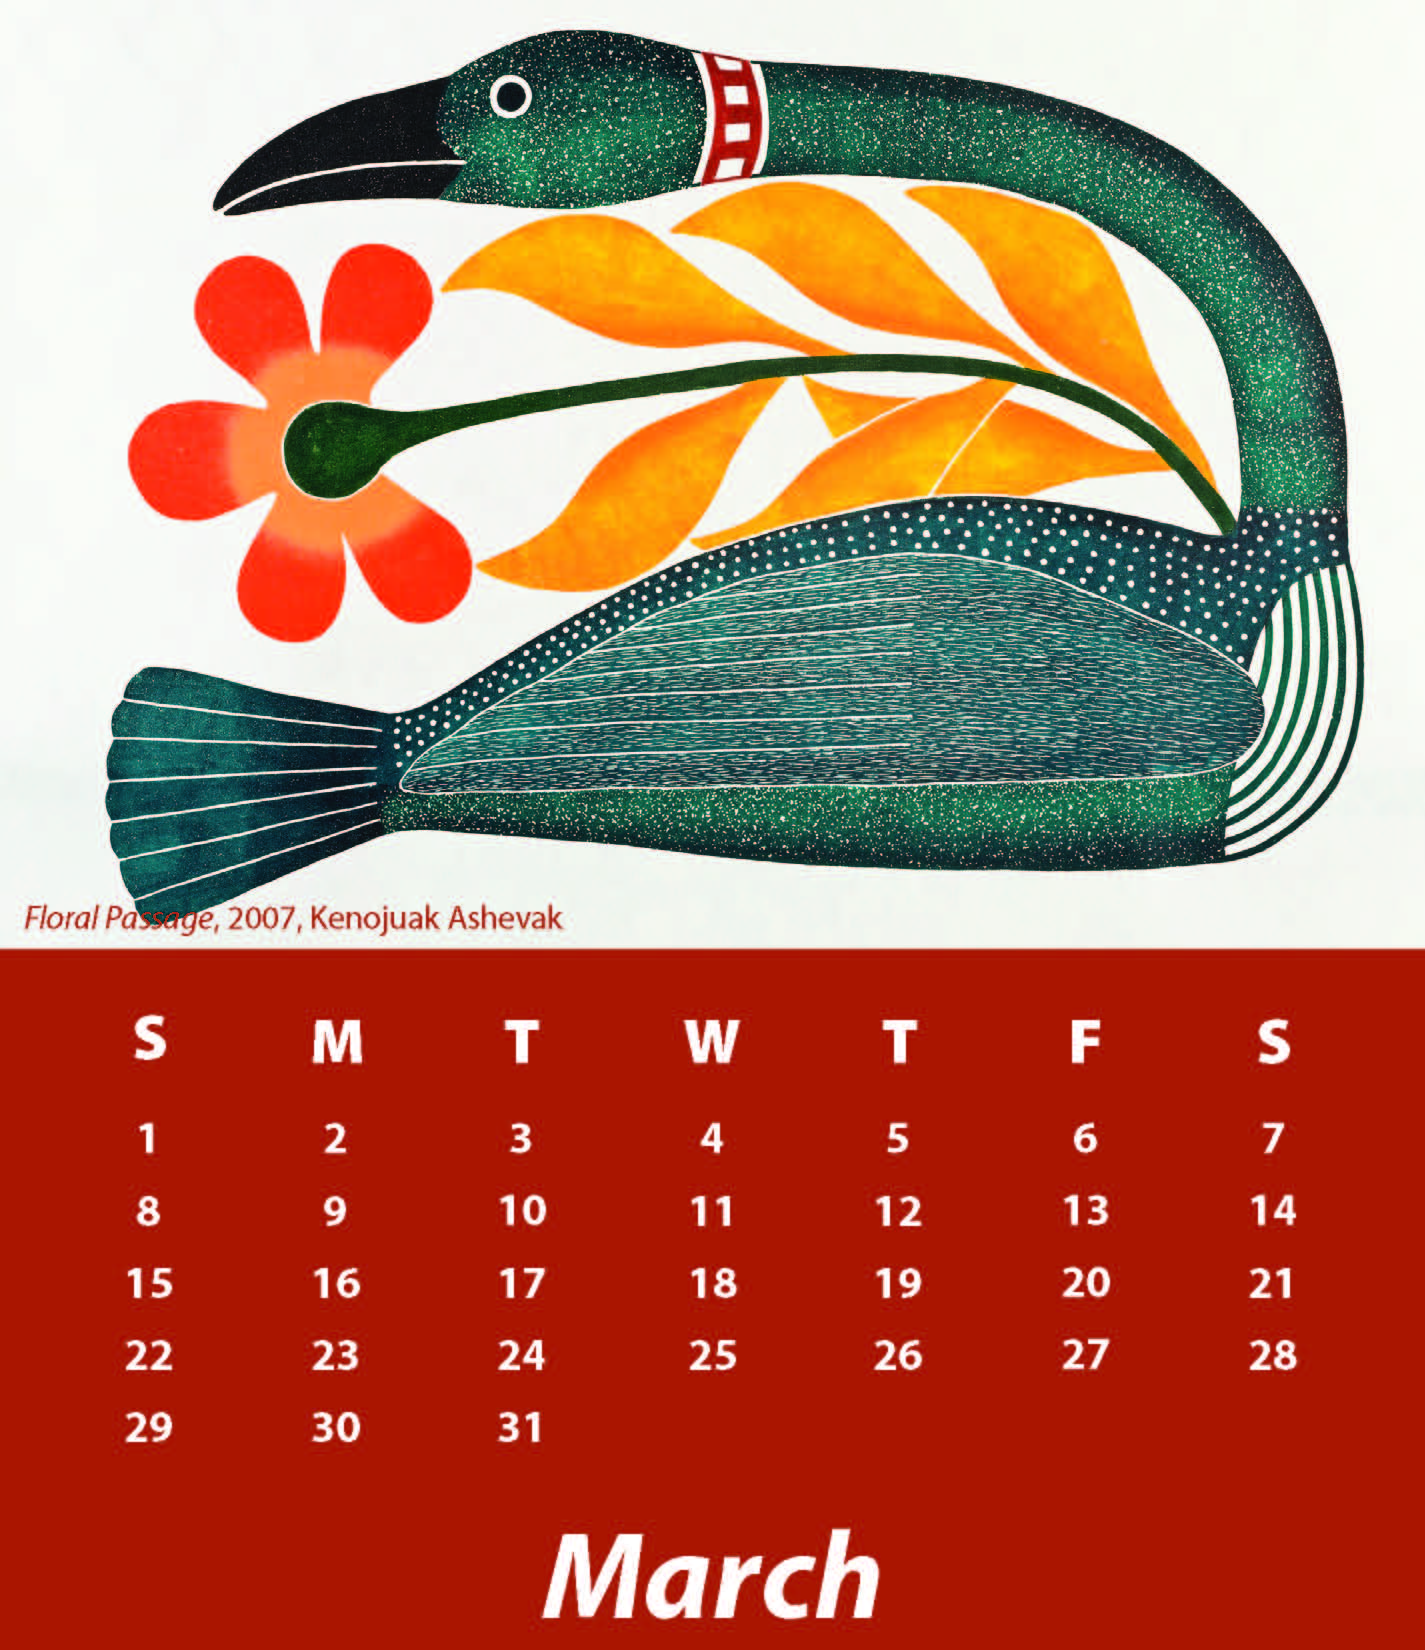 a March calendar with the image Floral Passage